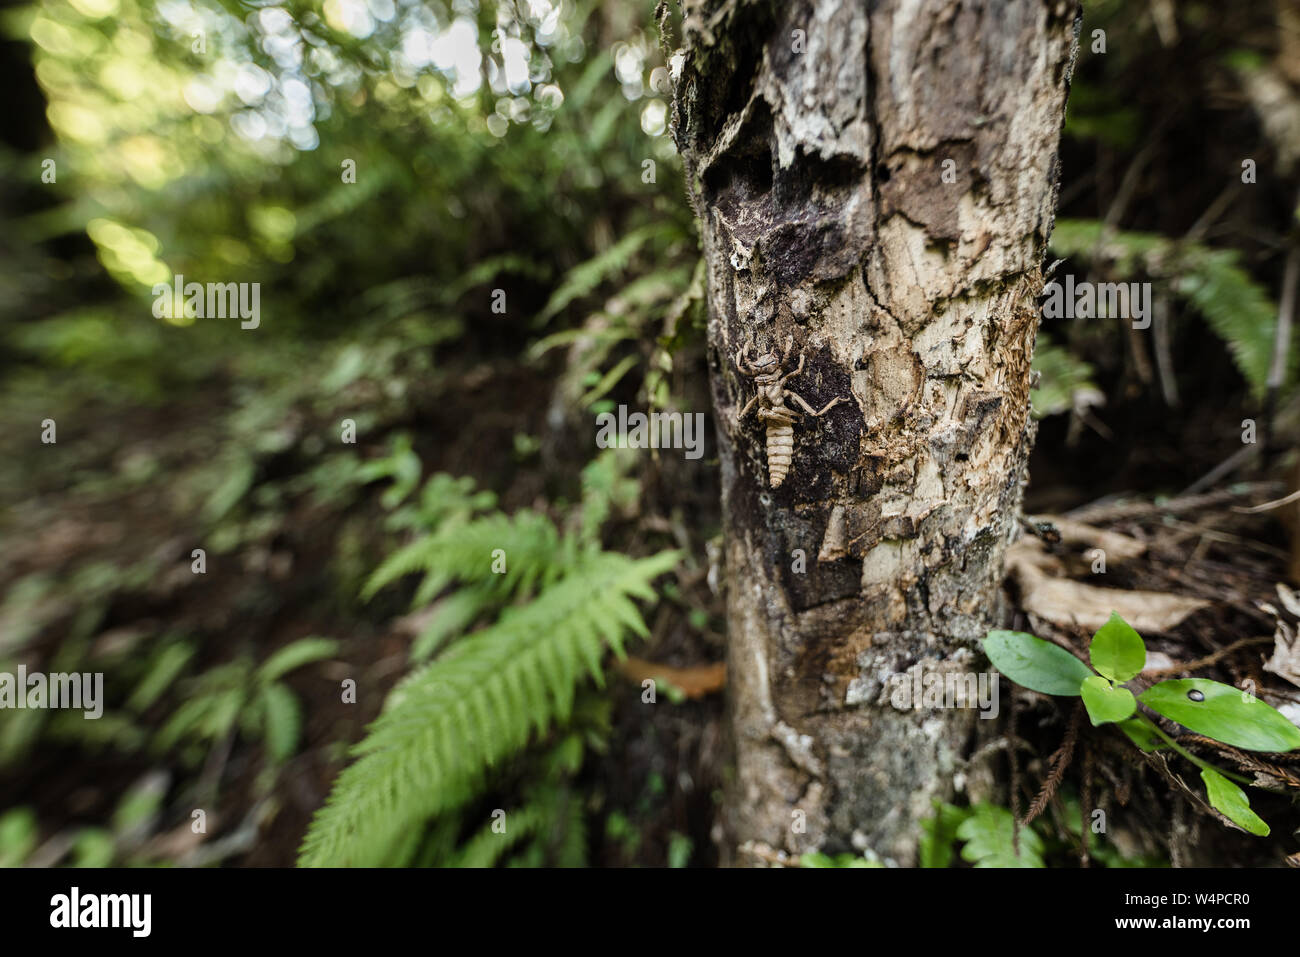 Weta insect on a tree trunk in a lush forest in New Zealand Stock Photo